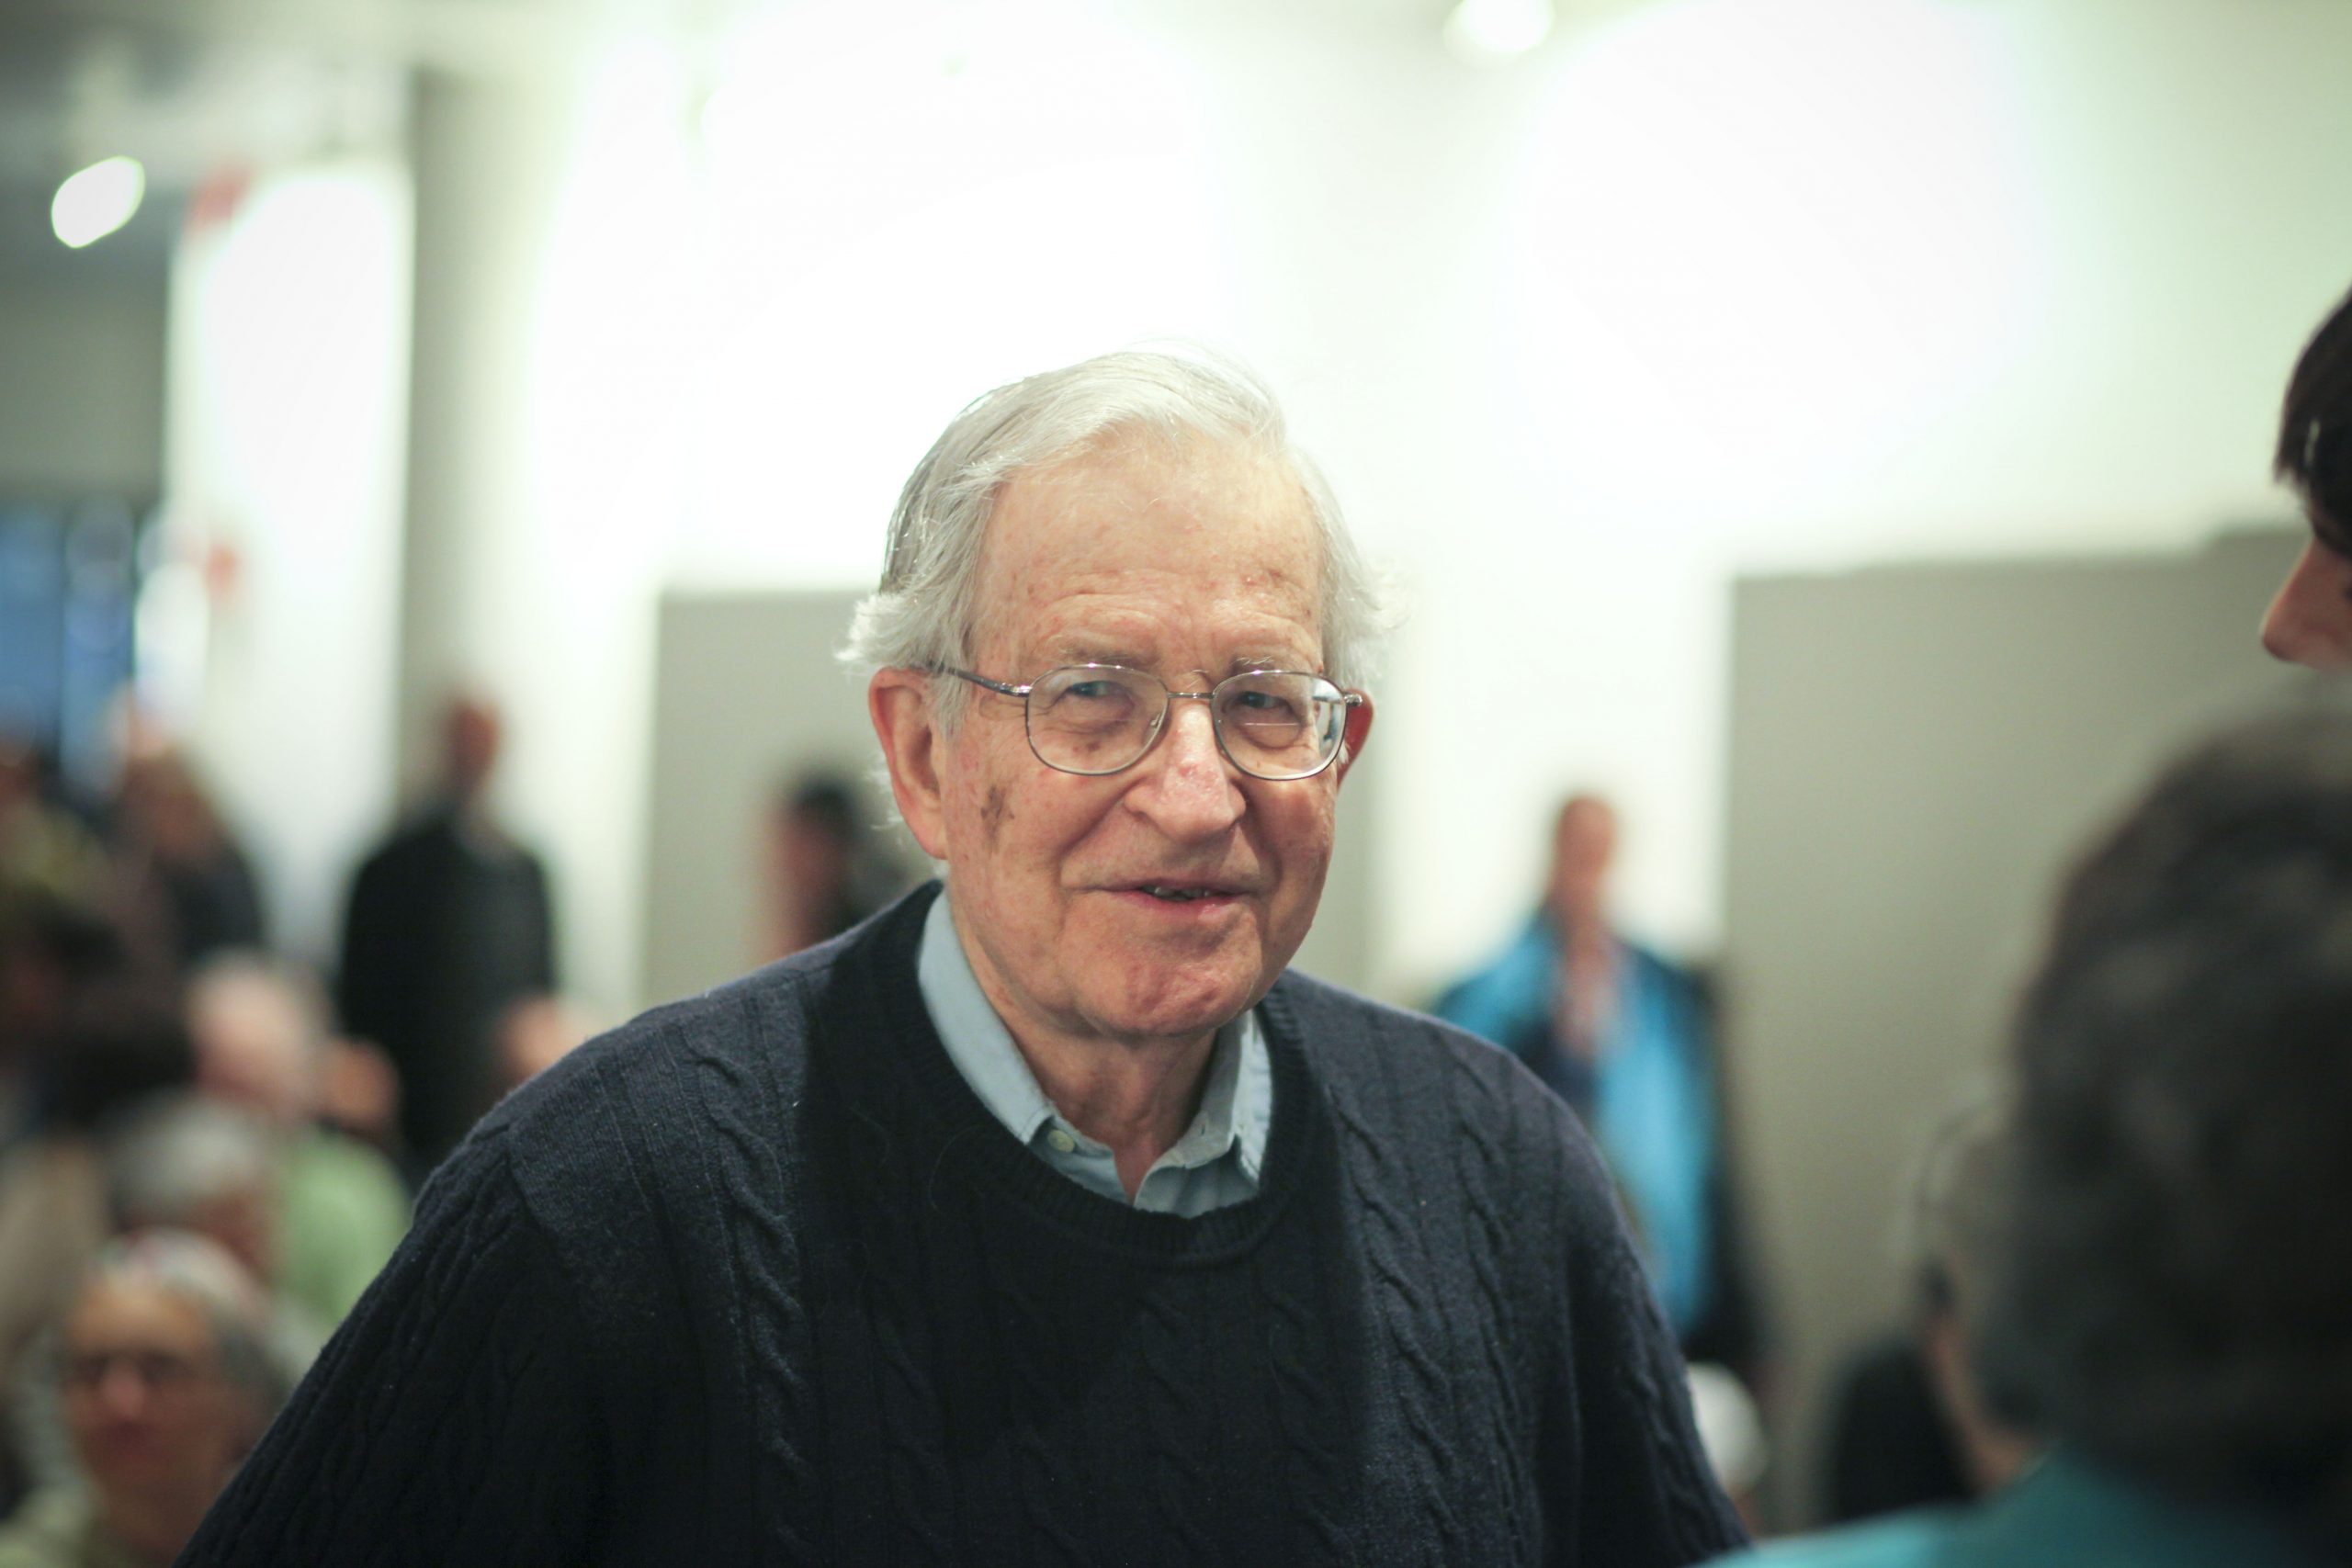 Noam Chomsky (*1928) is an American linguist, cognitive and history scientist